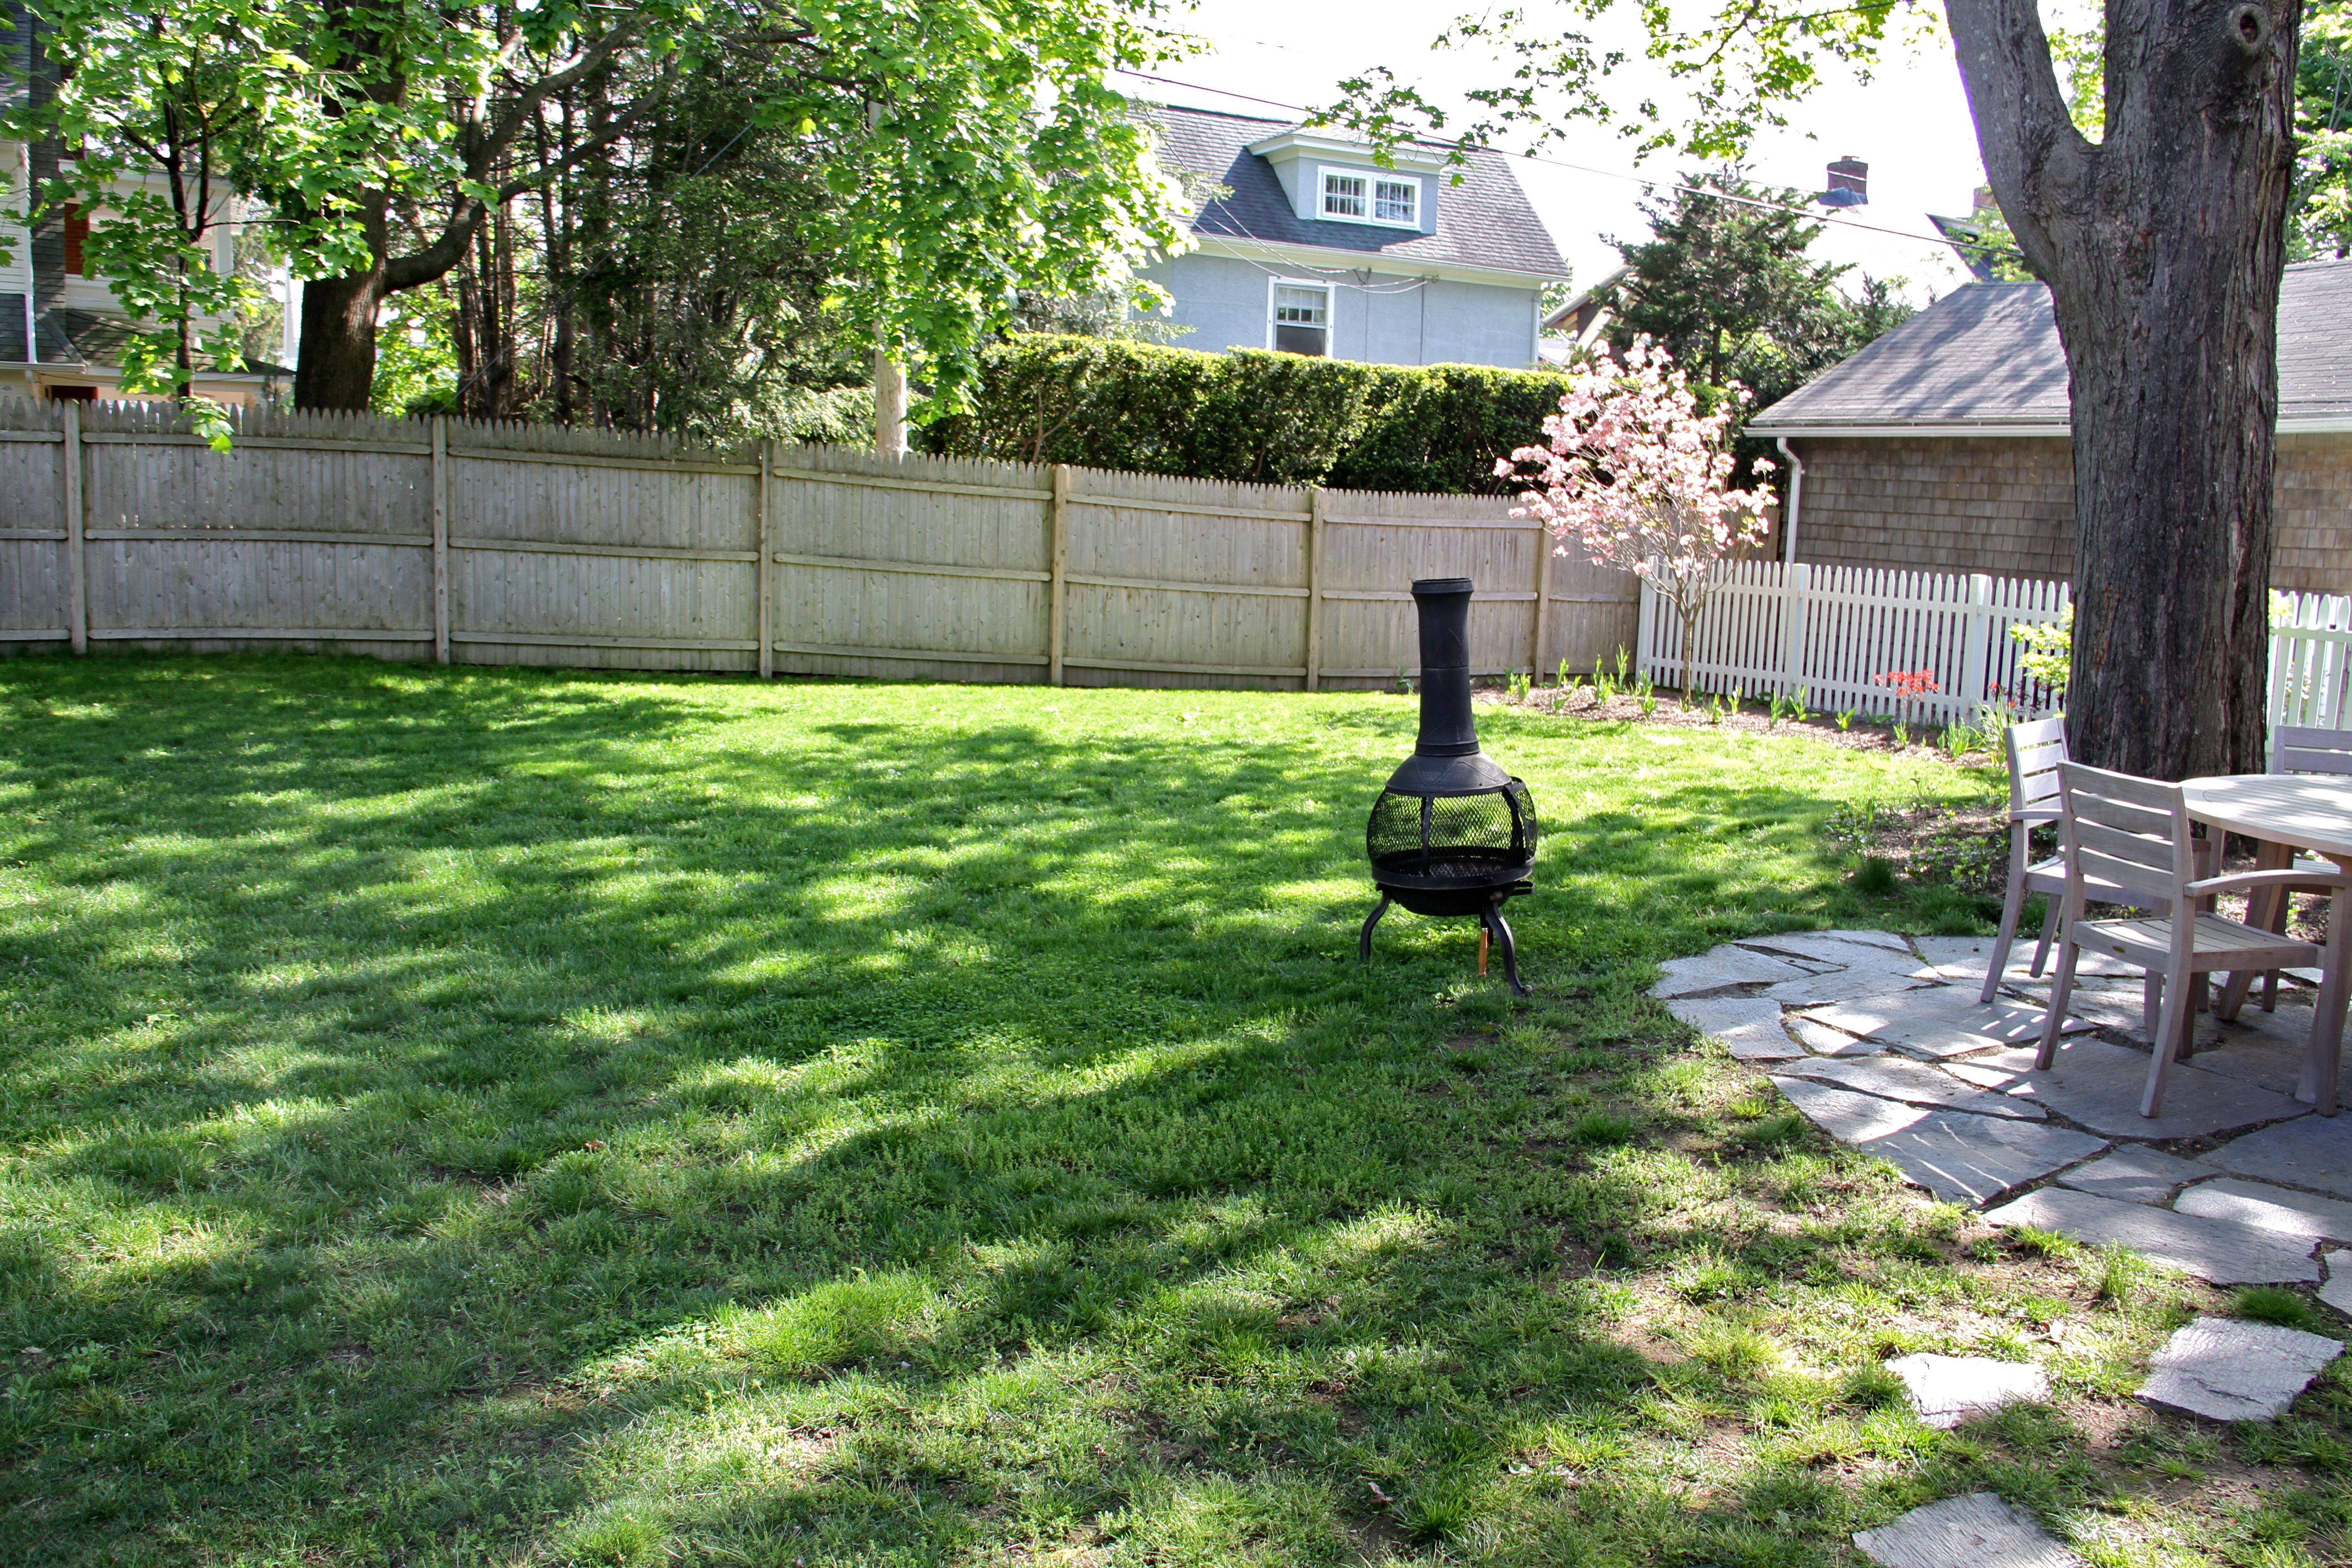 This is how the yard is looking these days - fence stained, compost contained, clean and pretty.